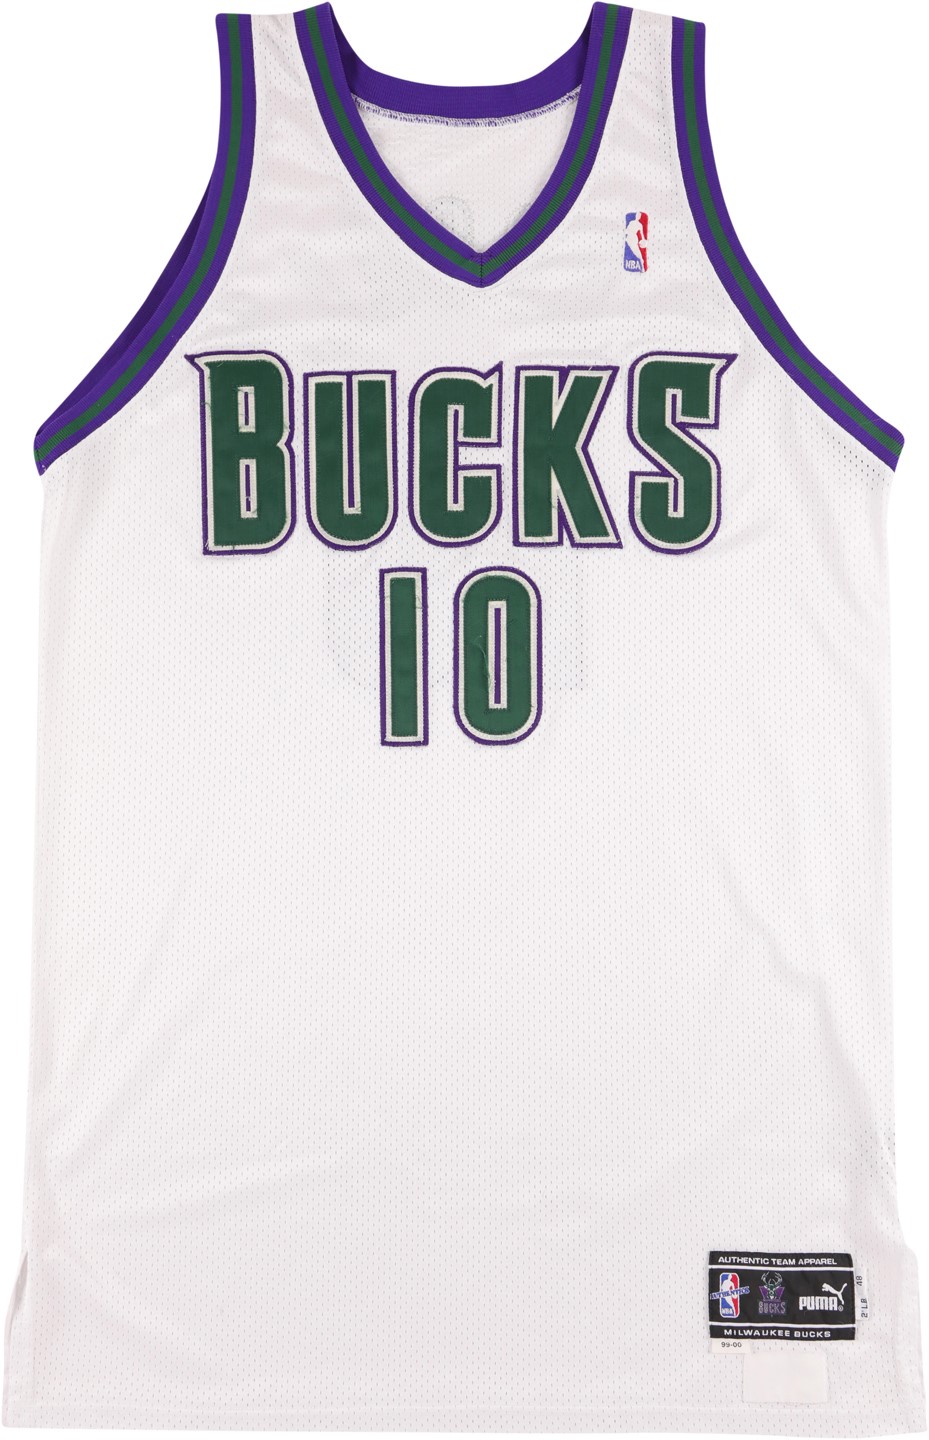 - 1999-2000 Sam Cassell Milwaukee Bucks Game Worn Jersey (Photo-Matched to Multiple Games)